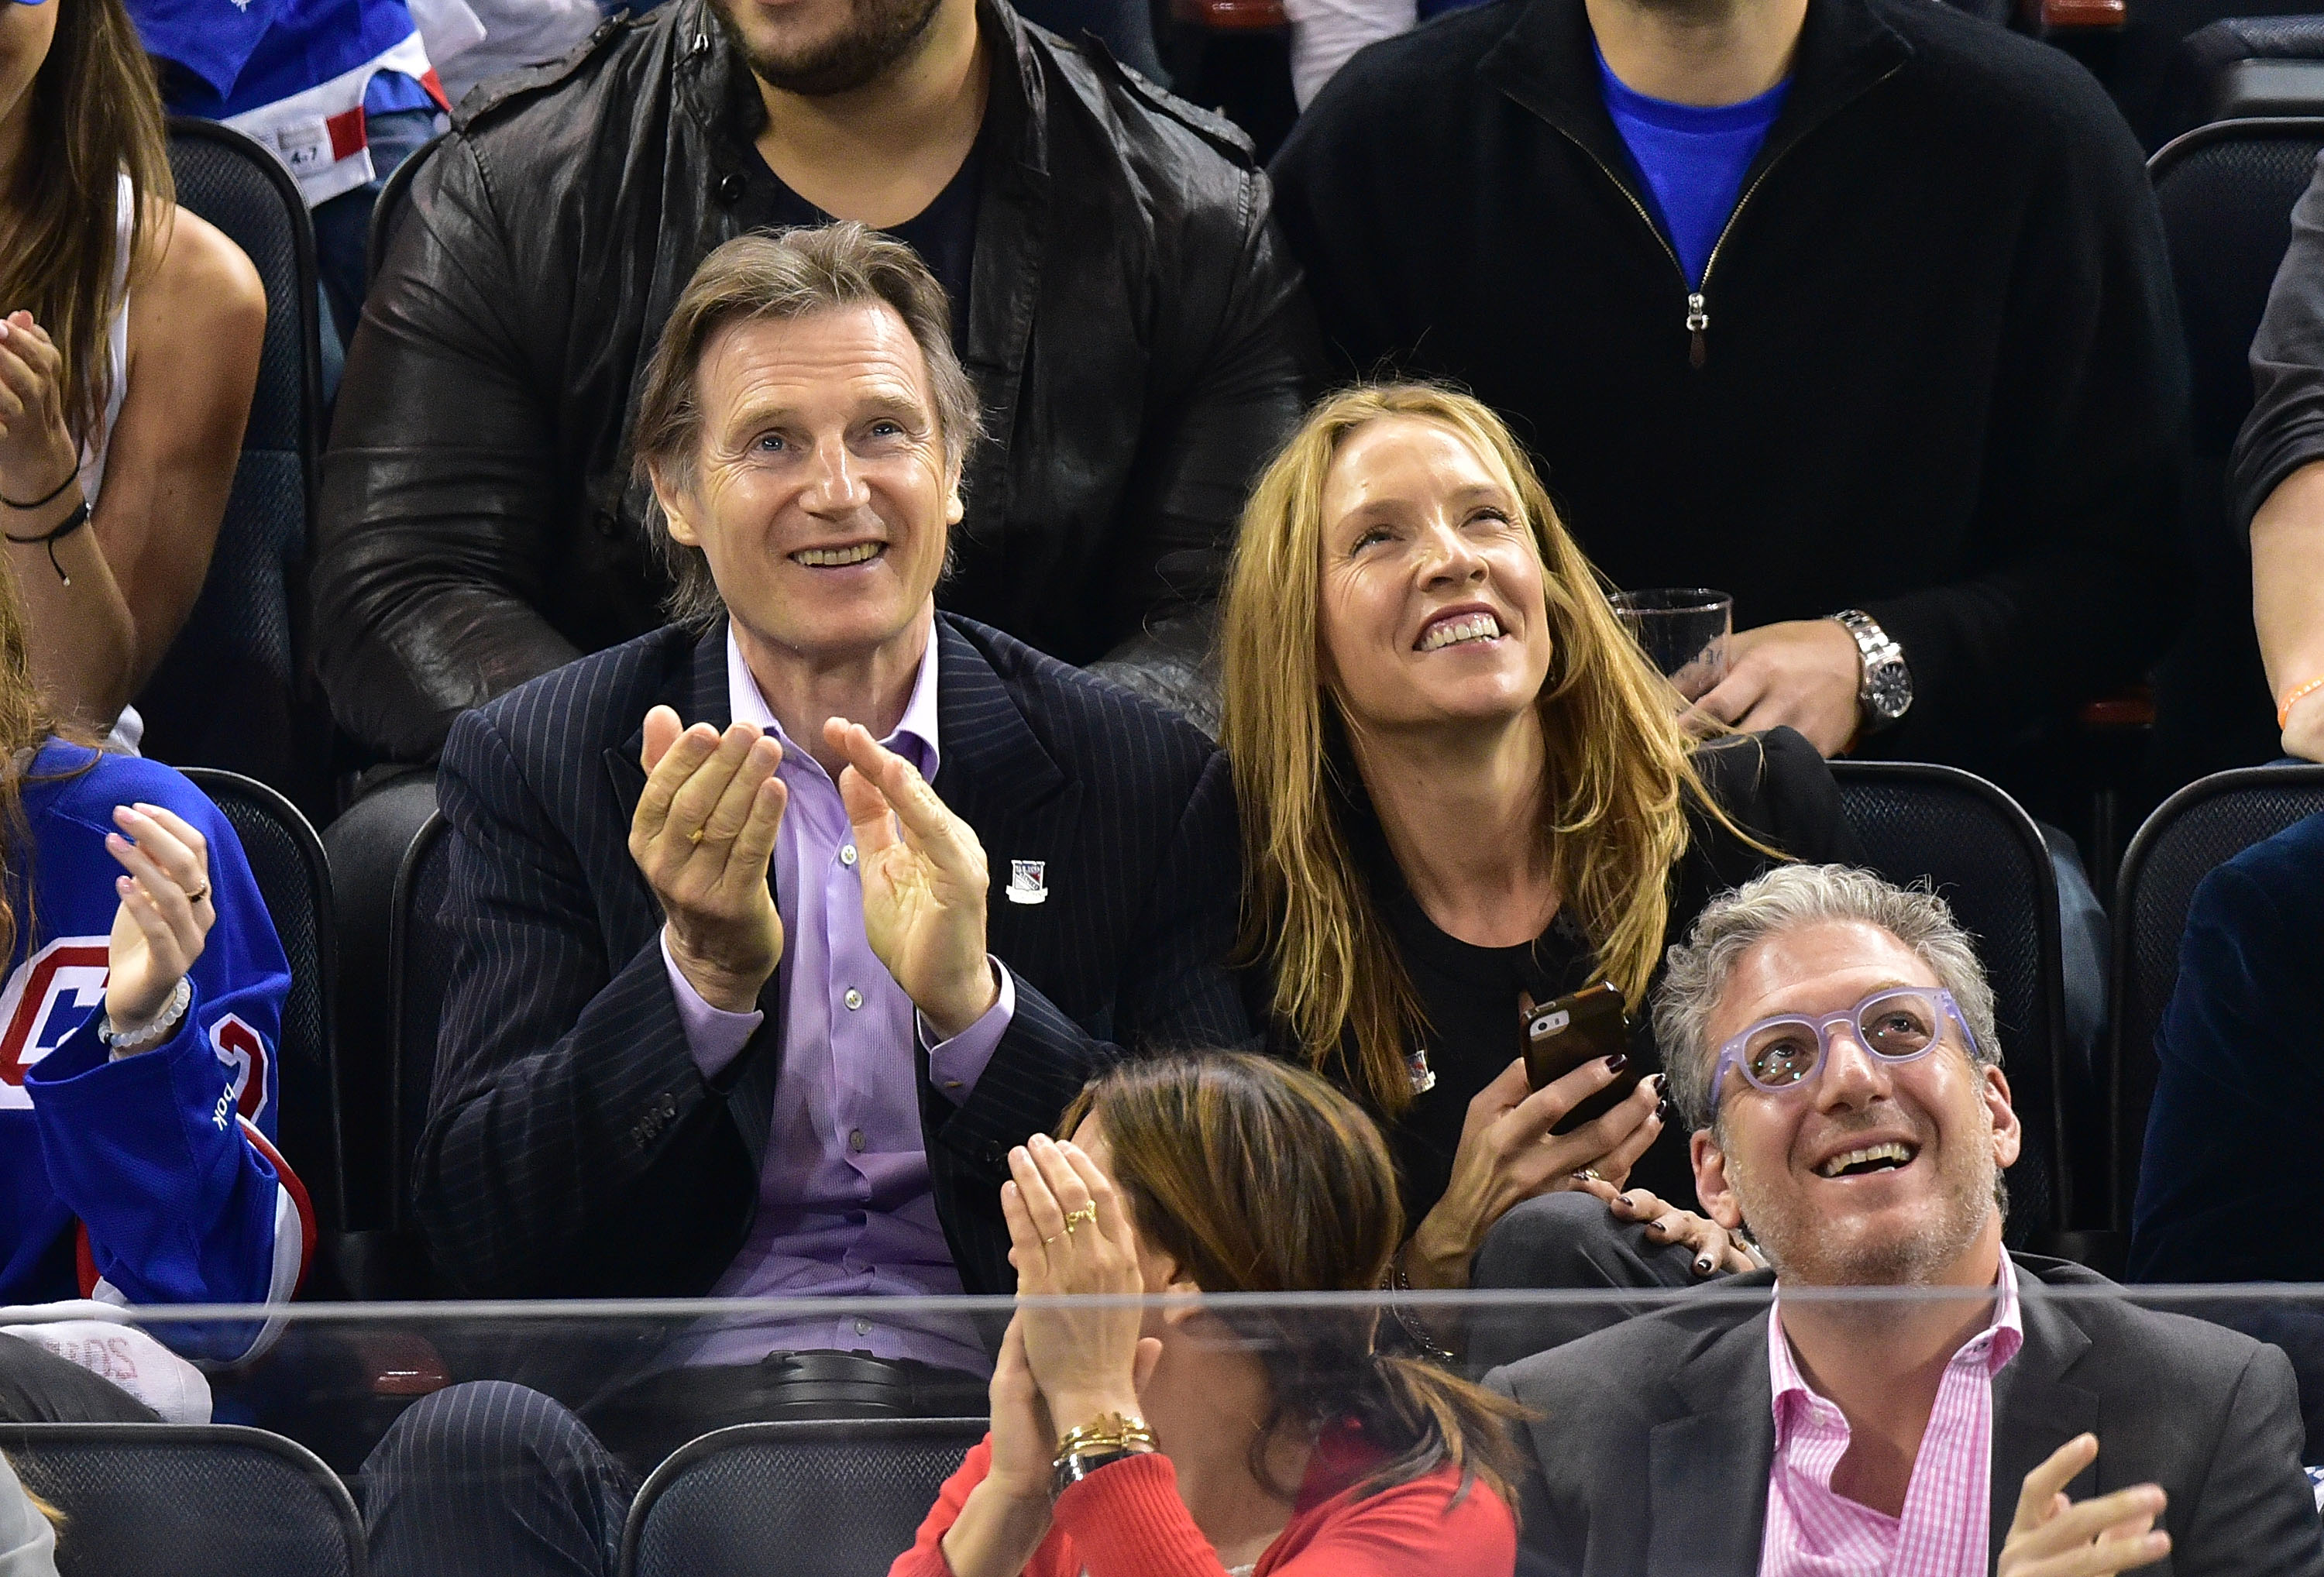 Liam Neeson and Freya St. Johnston in New York in 2015. | Source: Getty Images